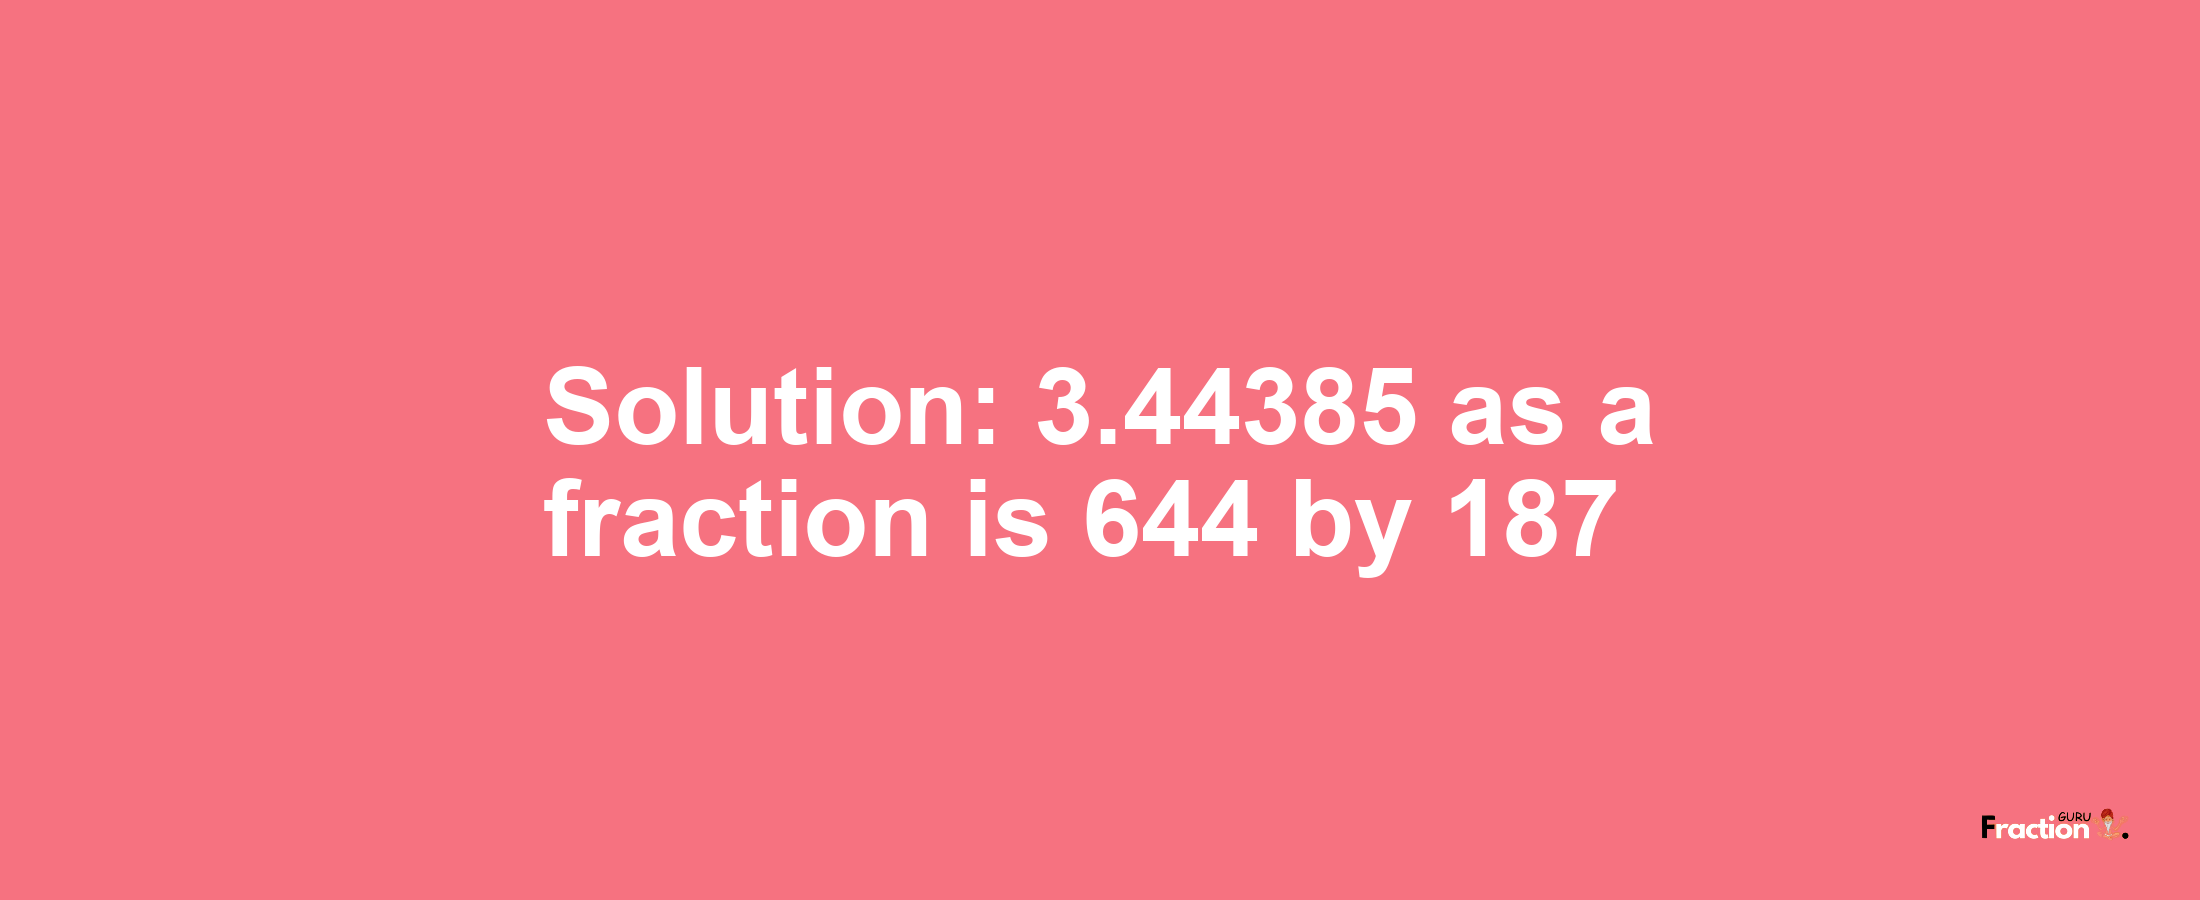 Solution:3.44385 as a fraction is 644/187